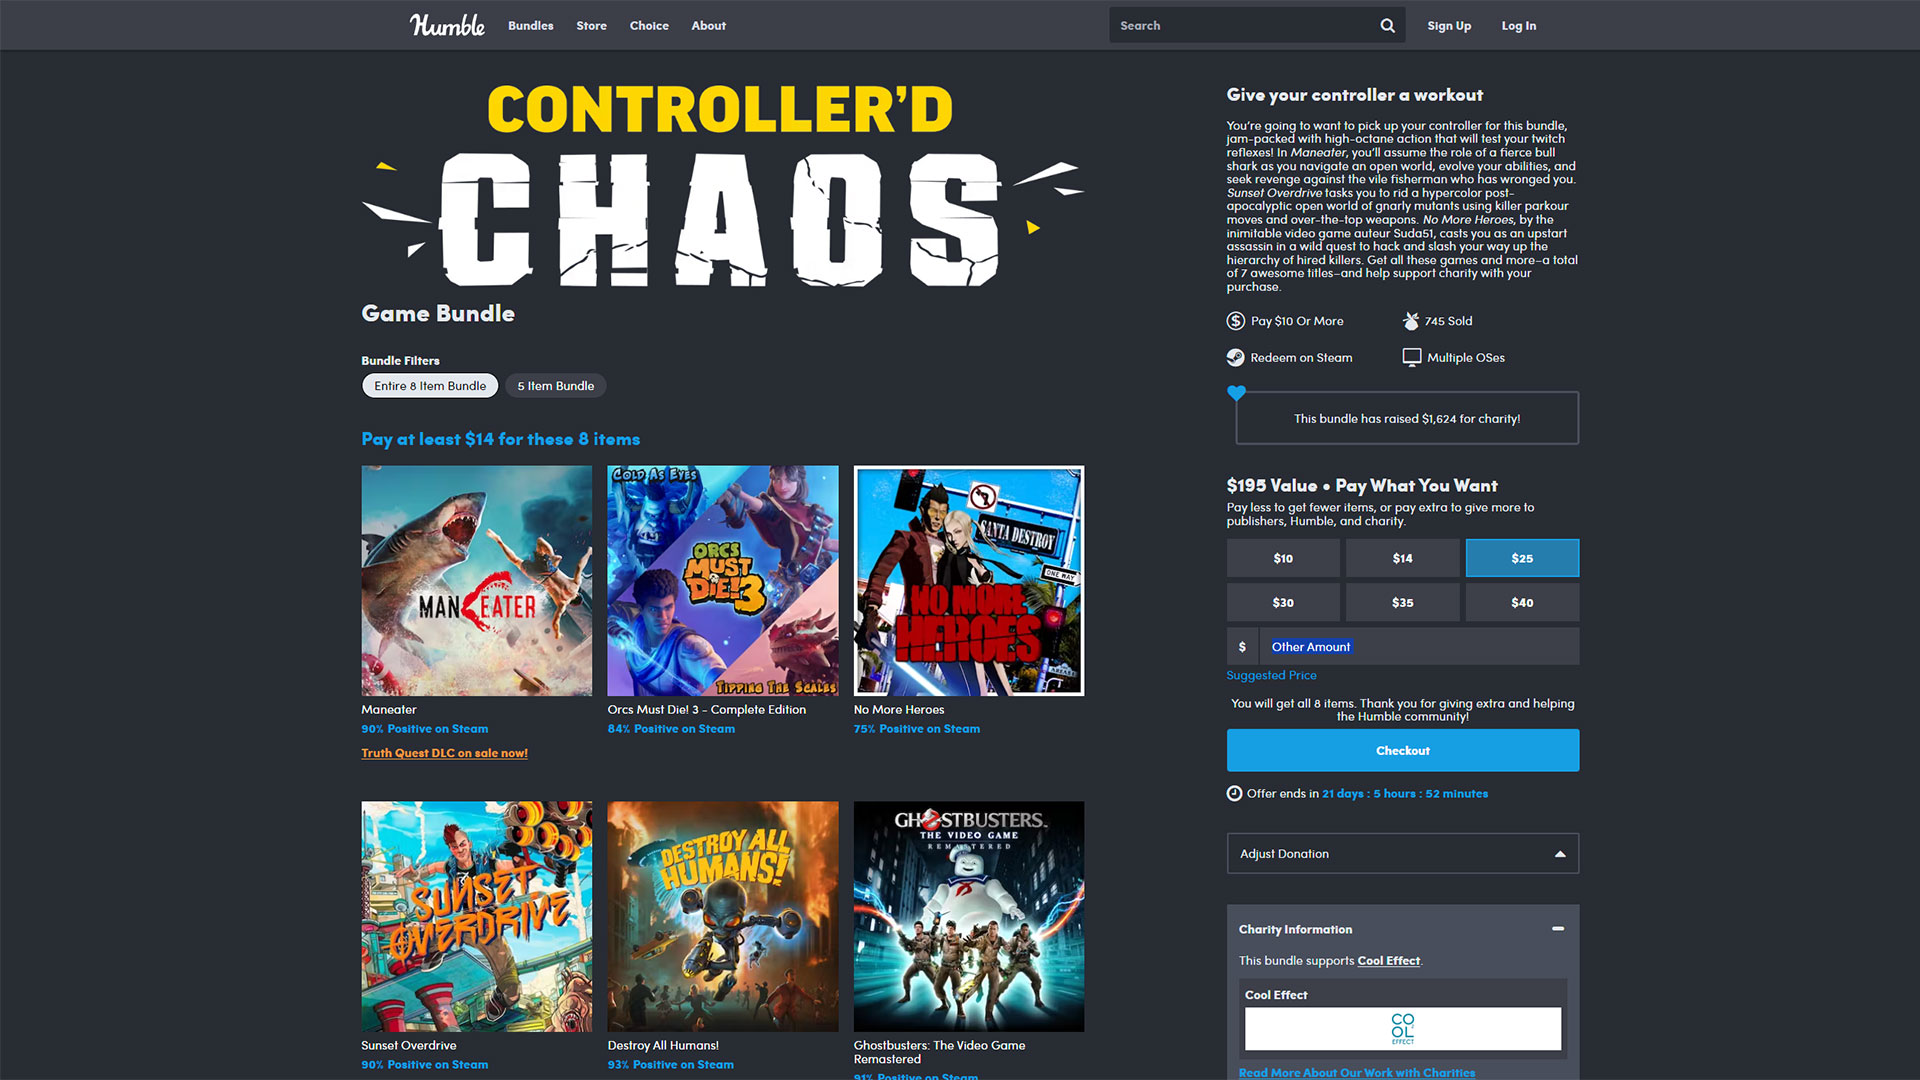 The Controller'd Chaos Game Bundle from Humble gets you 7 games and a coupon for $14